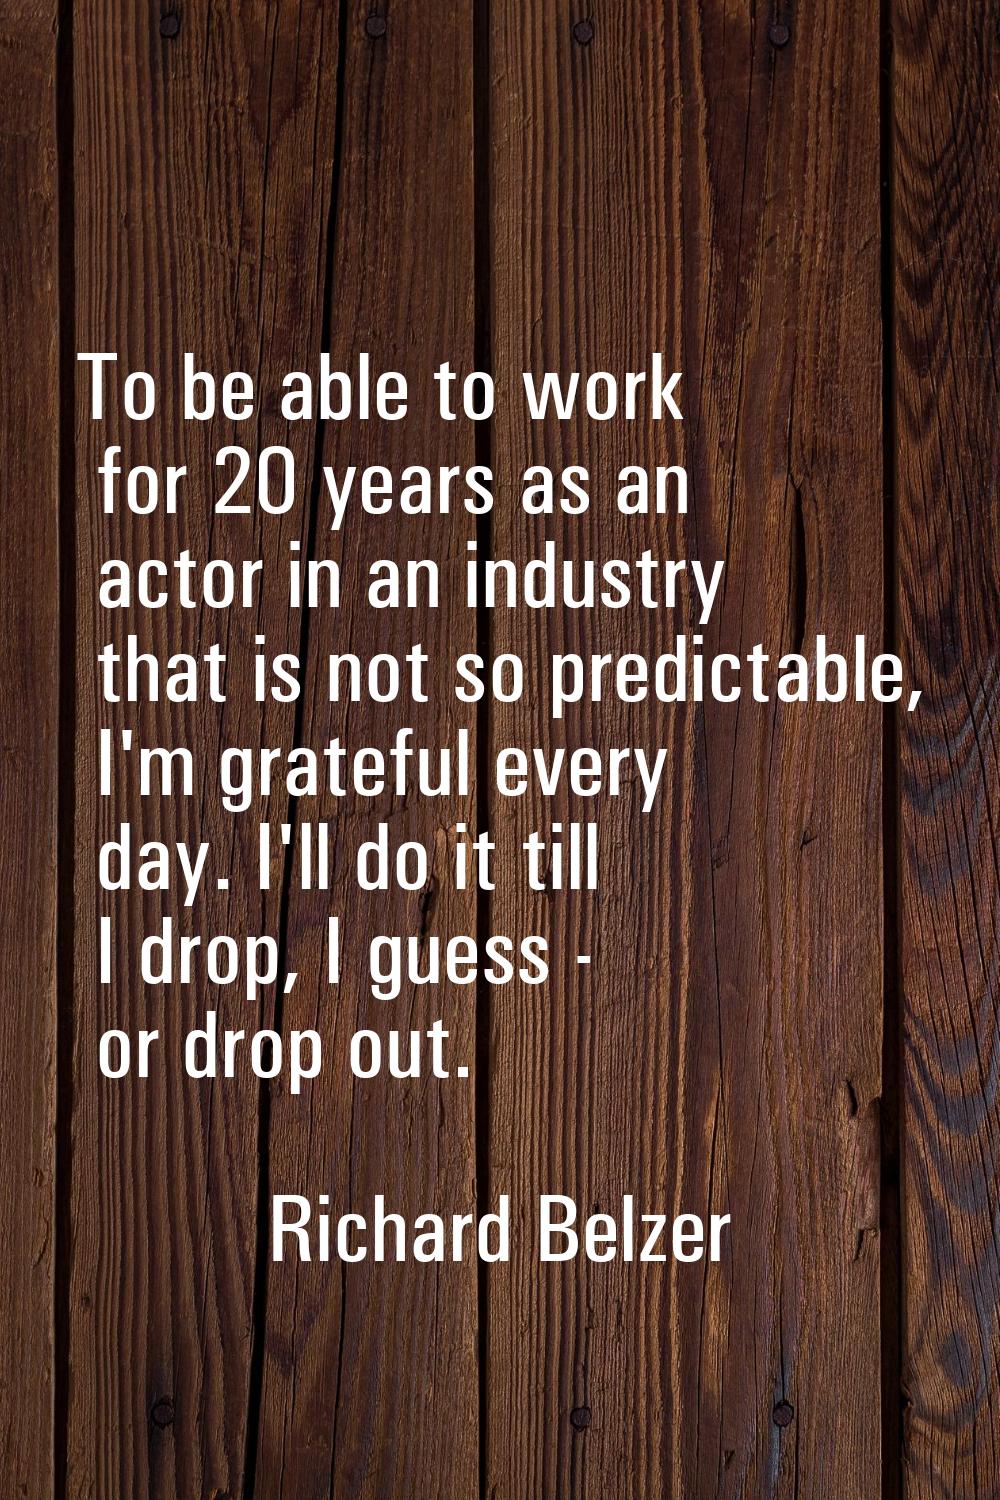 To be able to work for 20 years as an actor in an industry that is not so predictable, I'm grateful